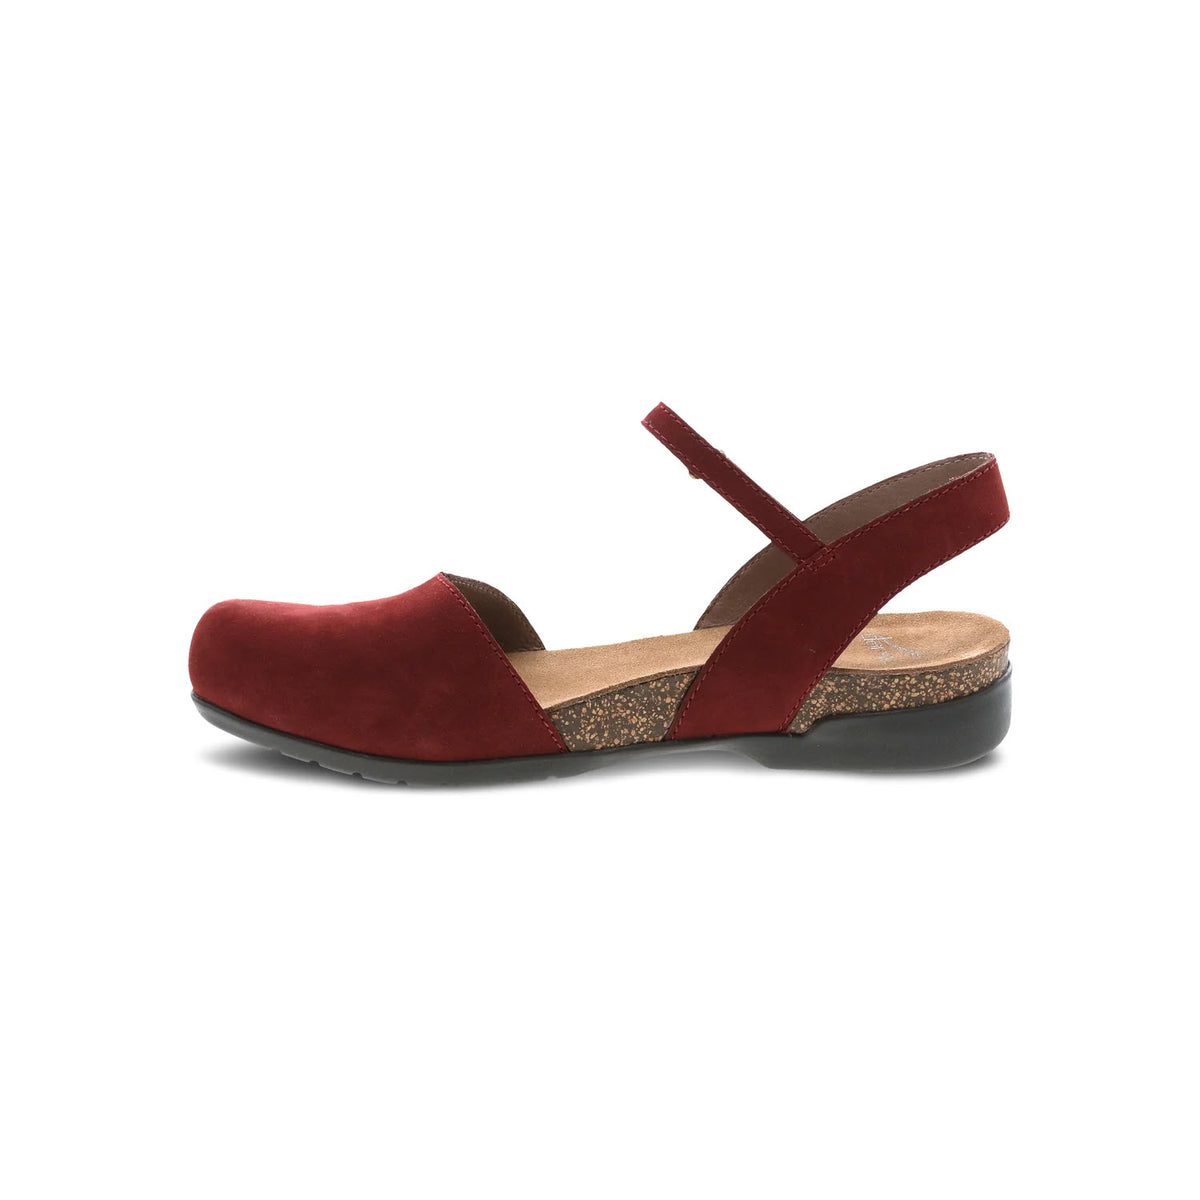 A red women&#39;s casual sandal with an ankle strap and a low heel, featuring a cork footbed, displayed against a white background. This is the Dansko Rowan Cinnabar - Womens.